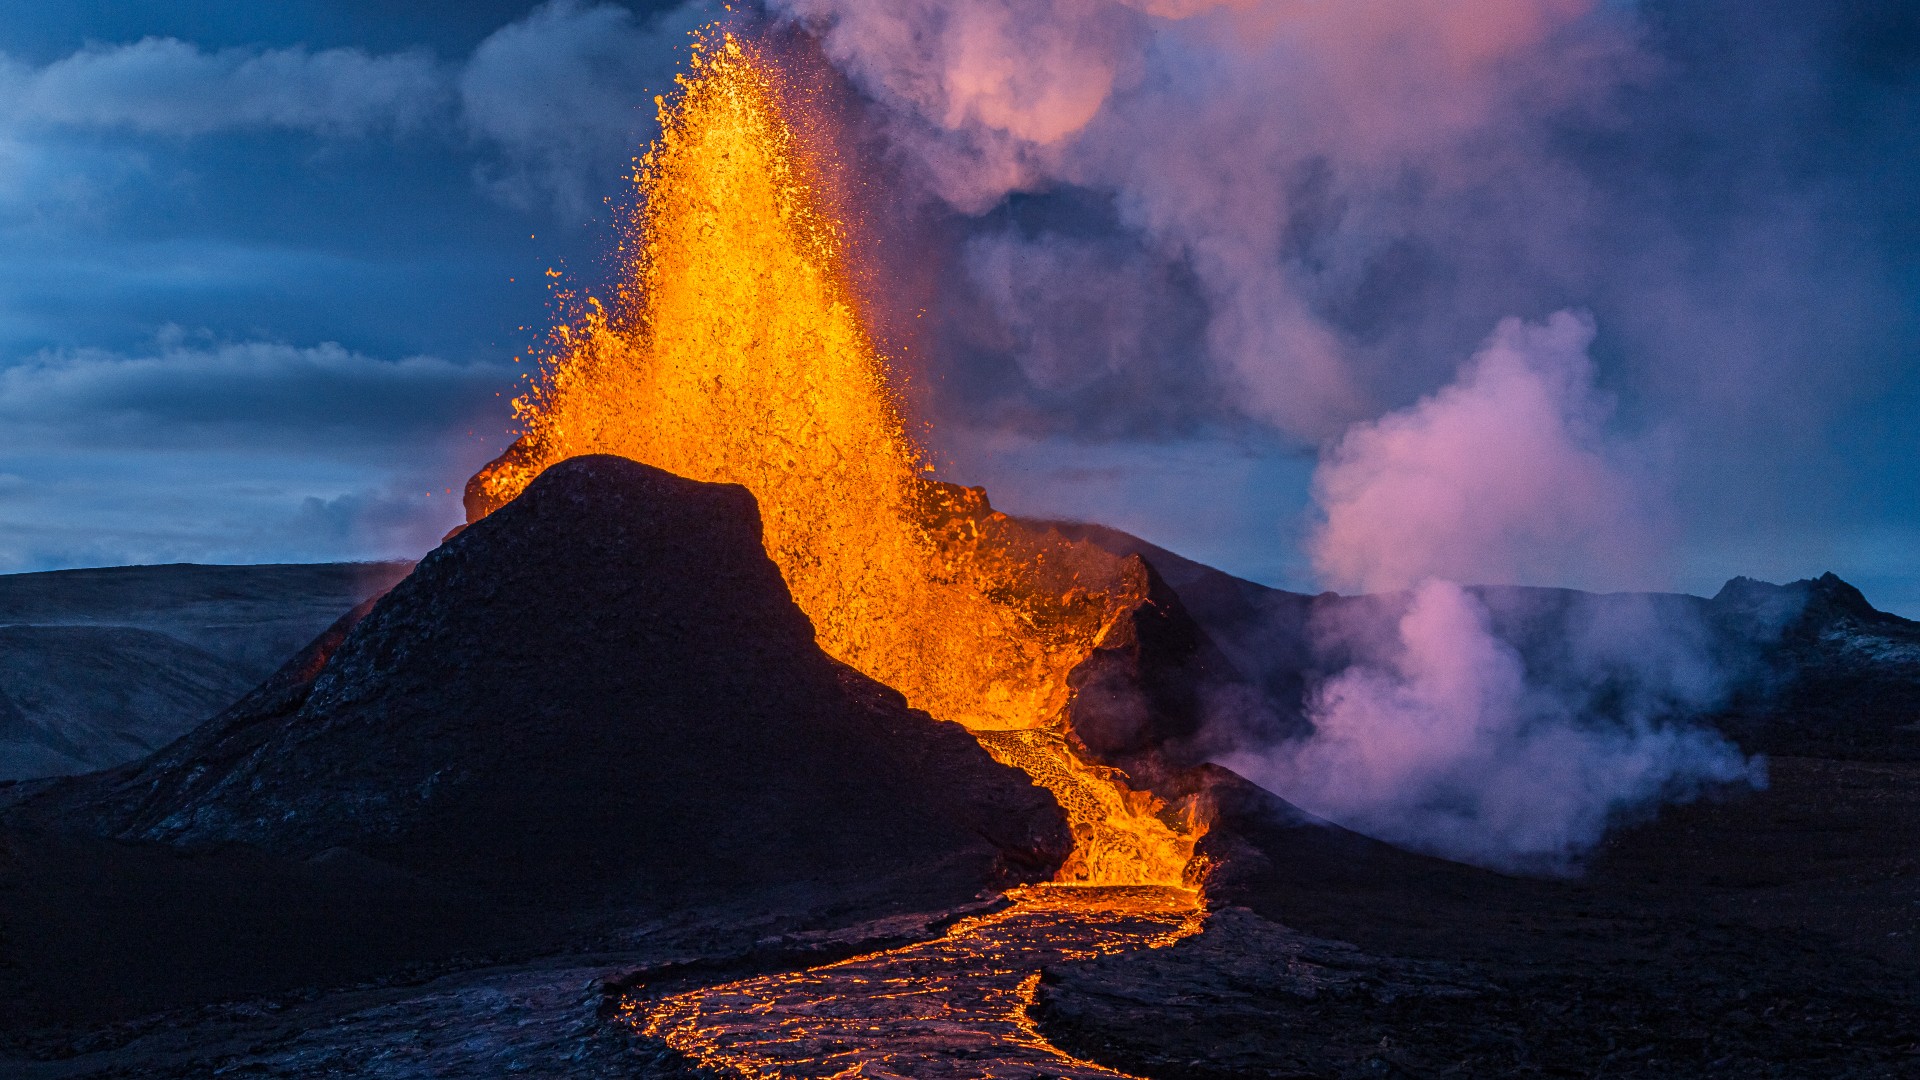 Volcano facts and types of volcanoes | Live Science